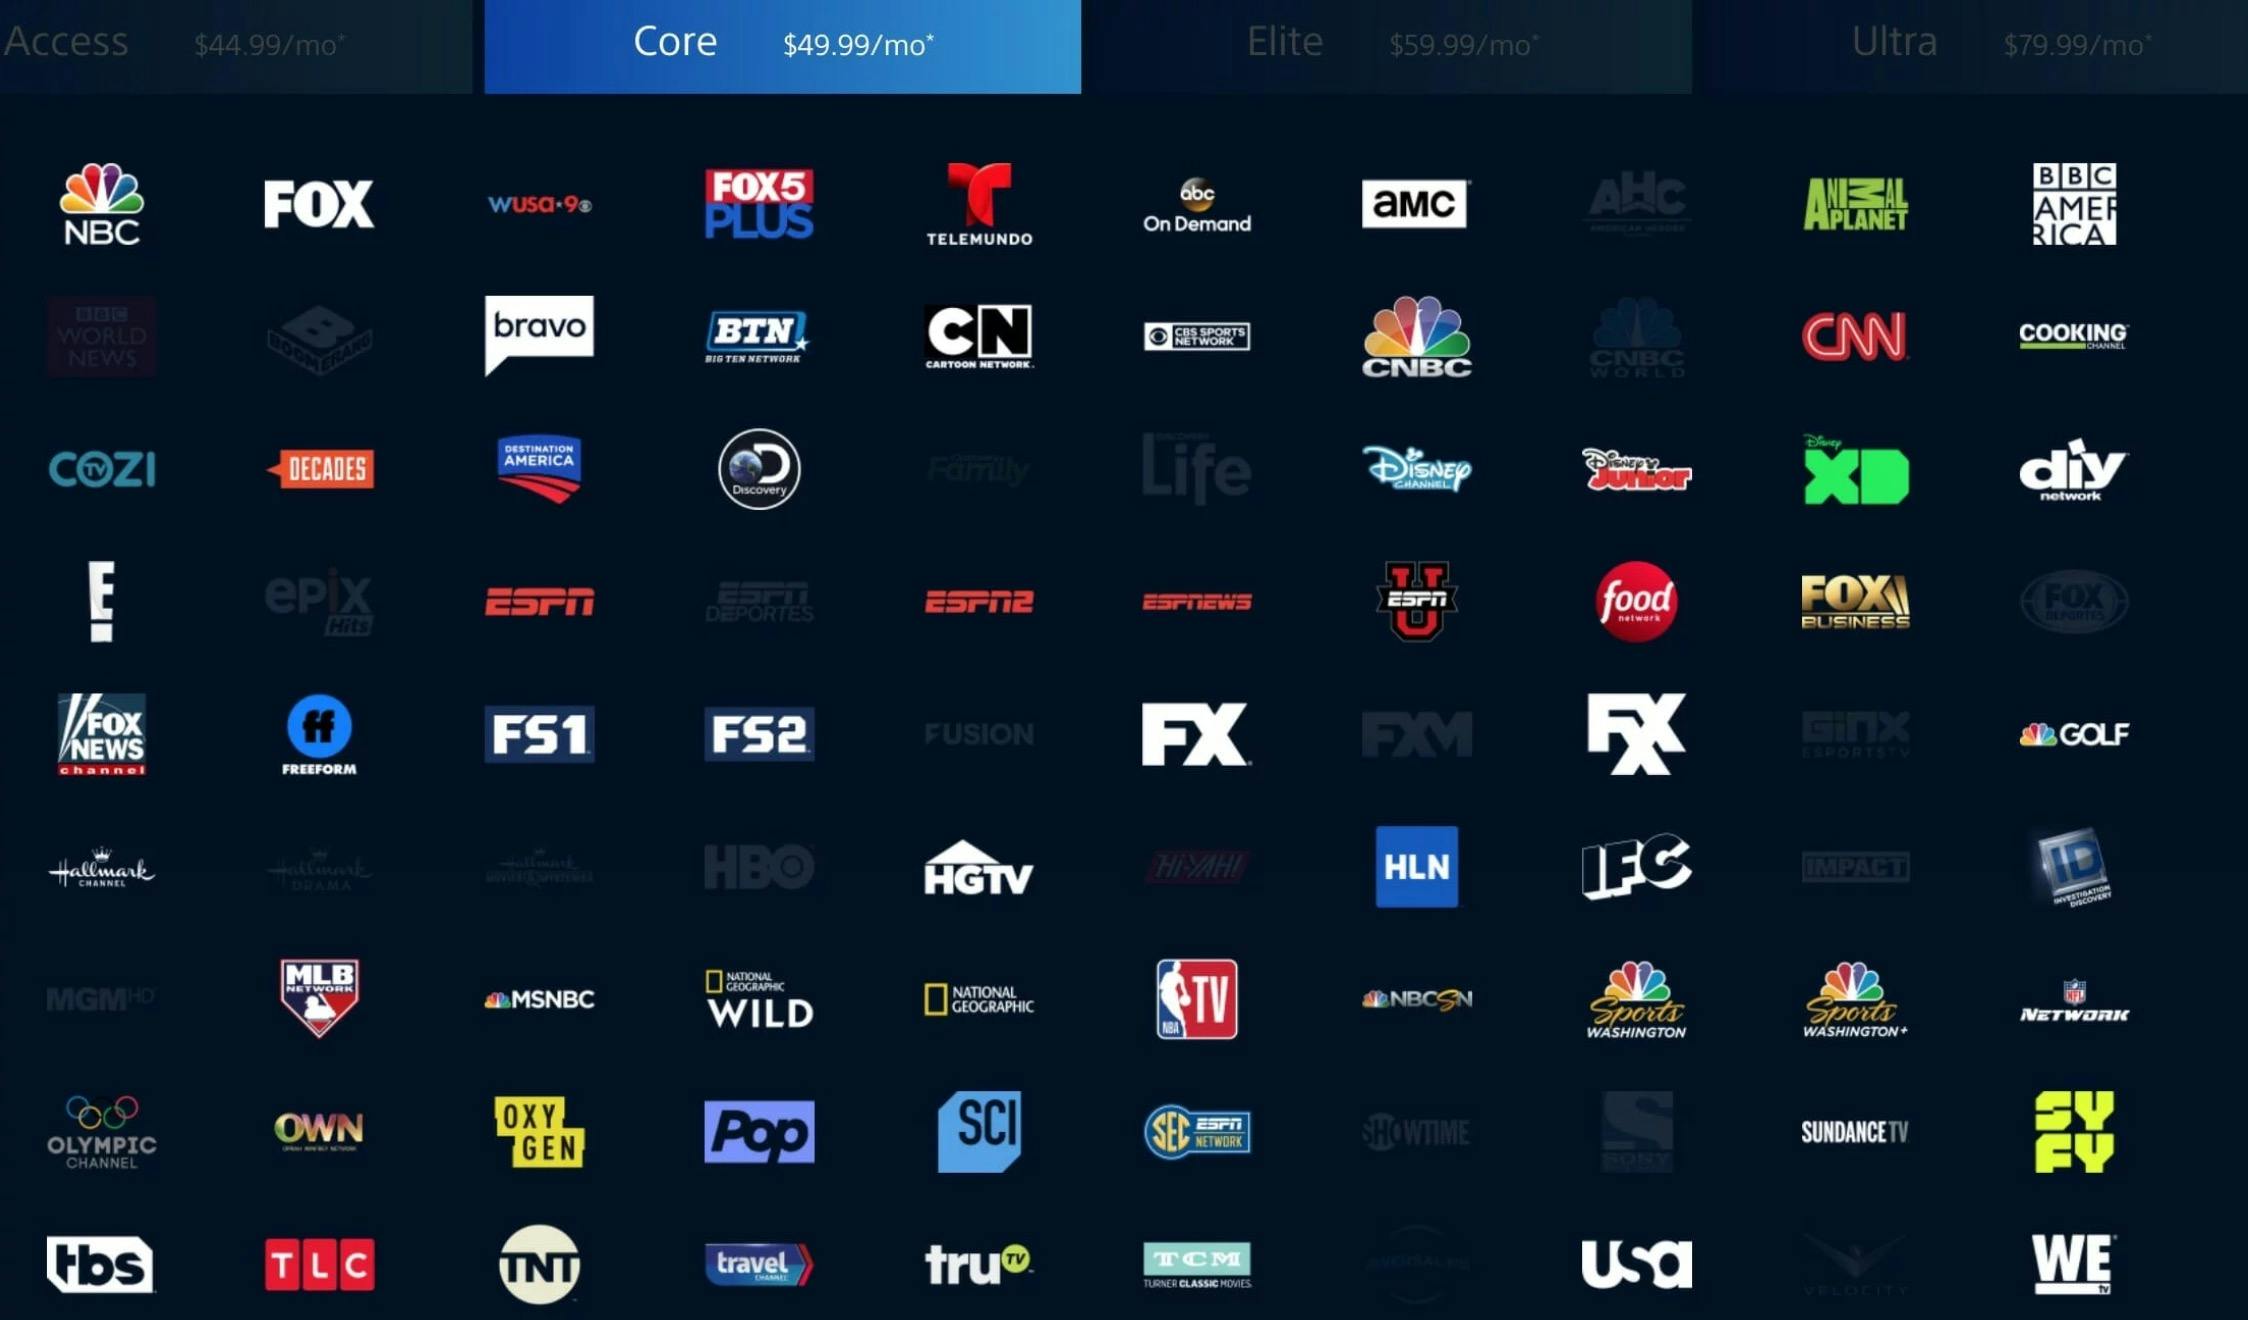 2019-leagues-cup-mls-liga mx live stream free playstation vue core